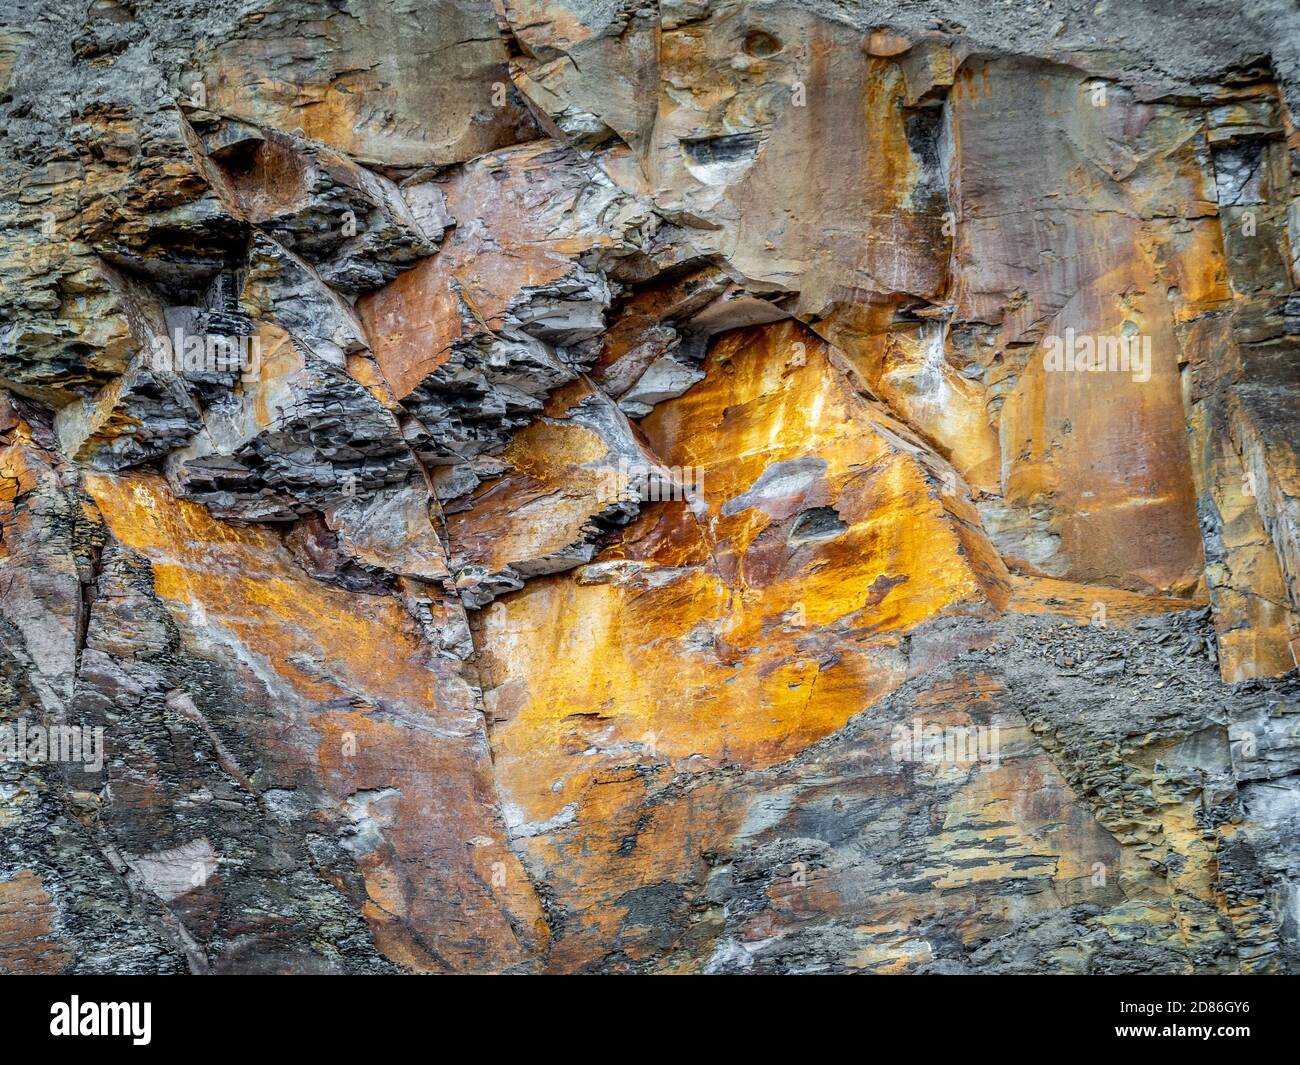 Red Ironstone and Grey shale rock in cliff at Runswick Bay, North Yorkshire Coast, UK. Stock Photo